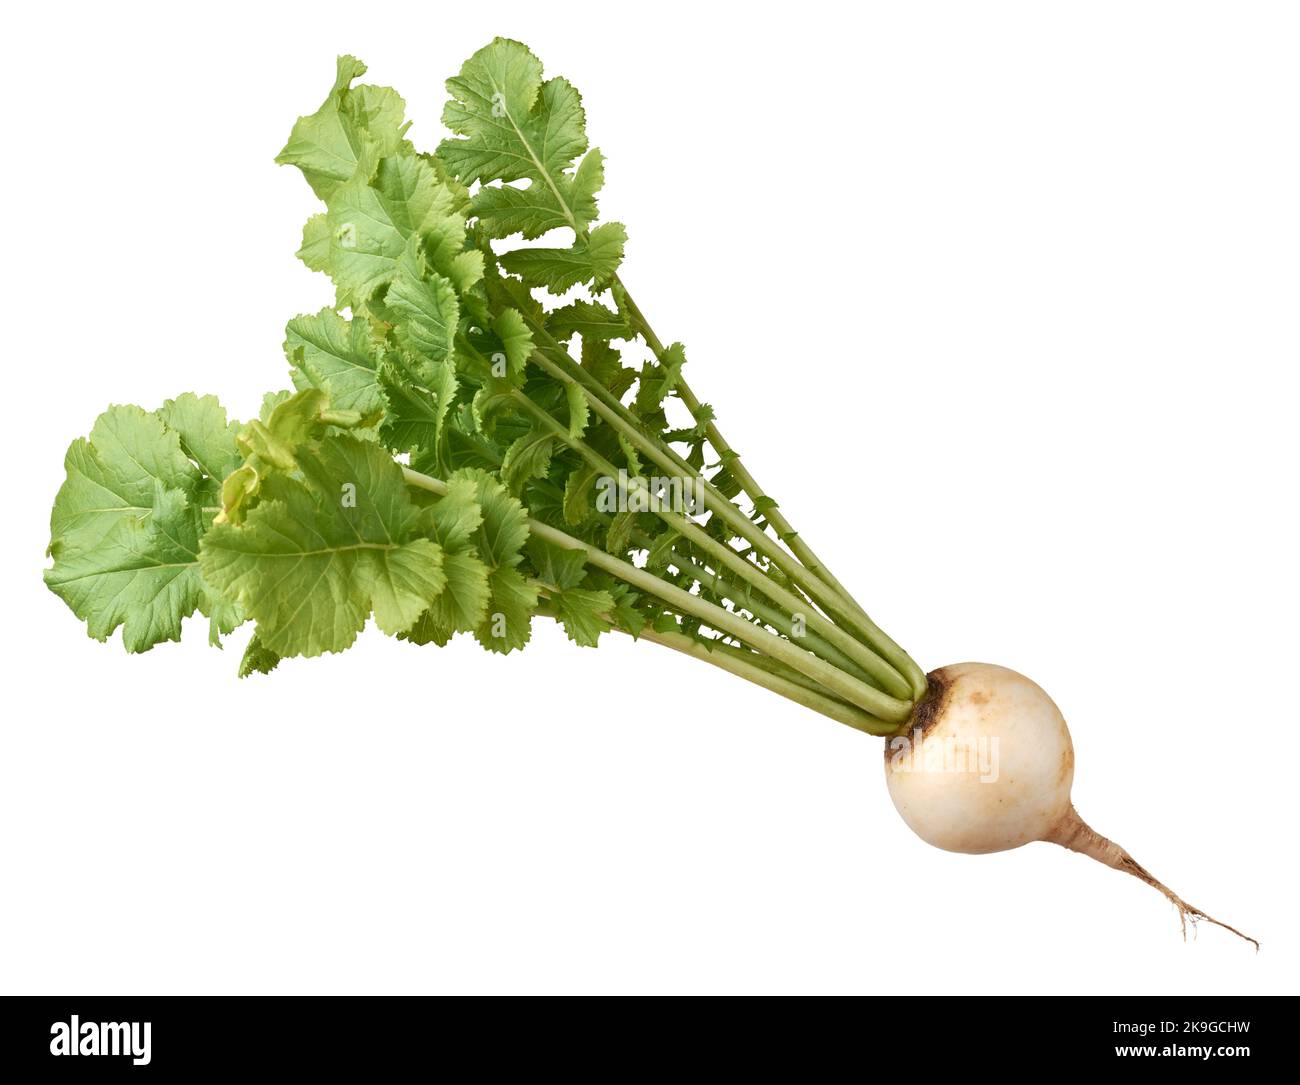 fresh white round radish with leaves, edible and healthy root vegetable isolated on white background Stock Photo